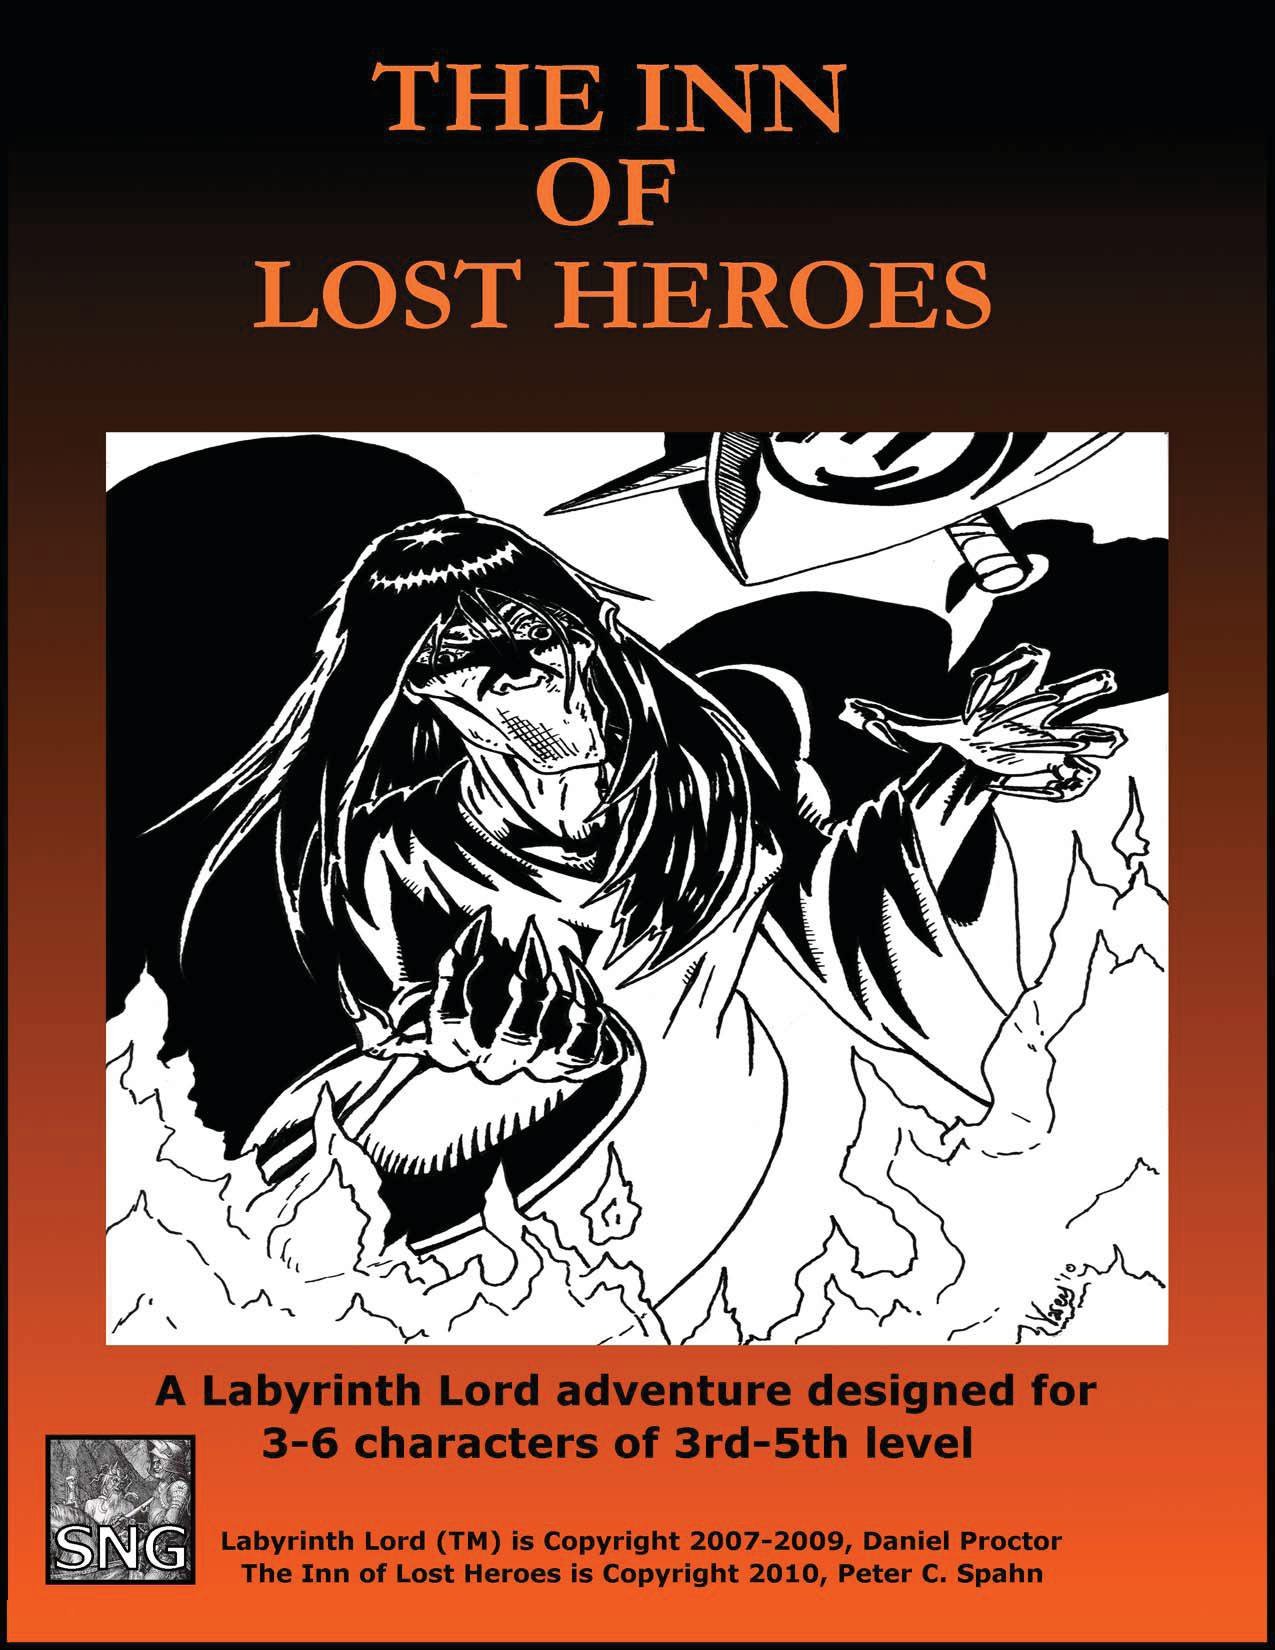 The lost hero